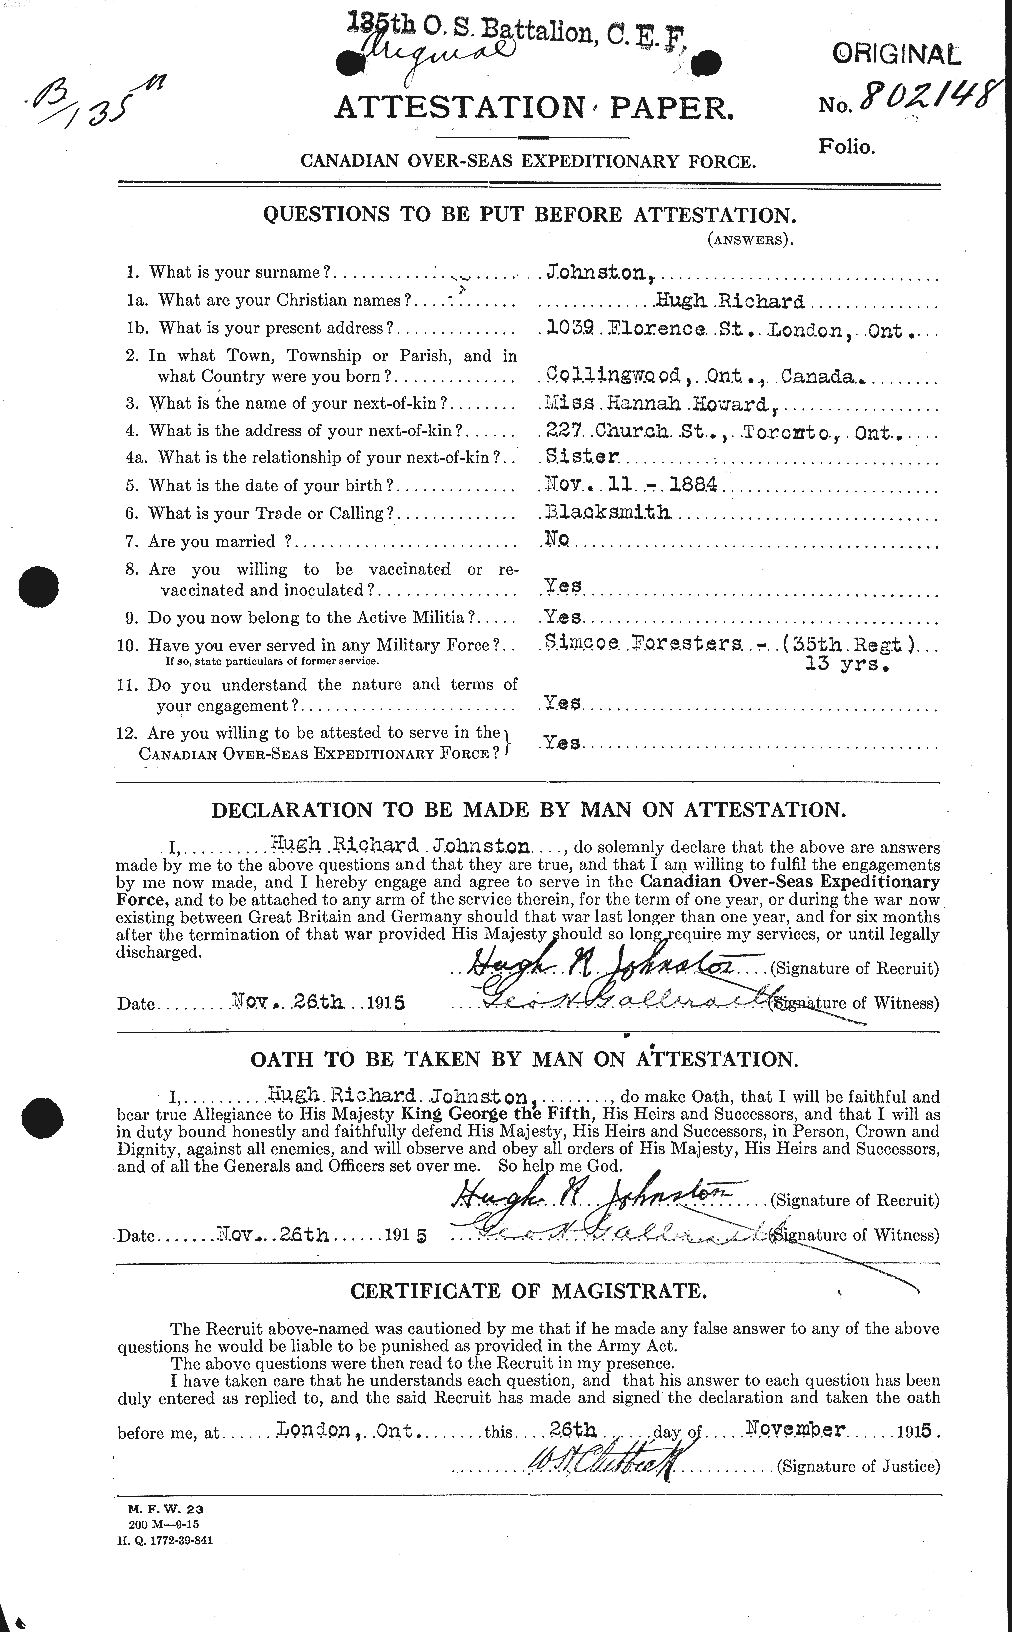 Personnel Records of the First World War - CEF 422667a